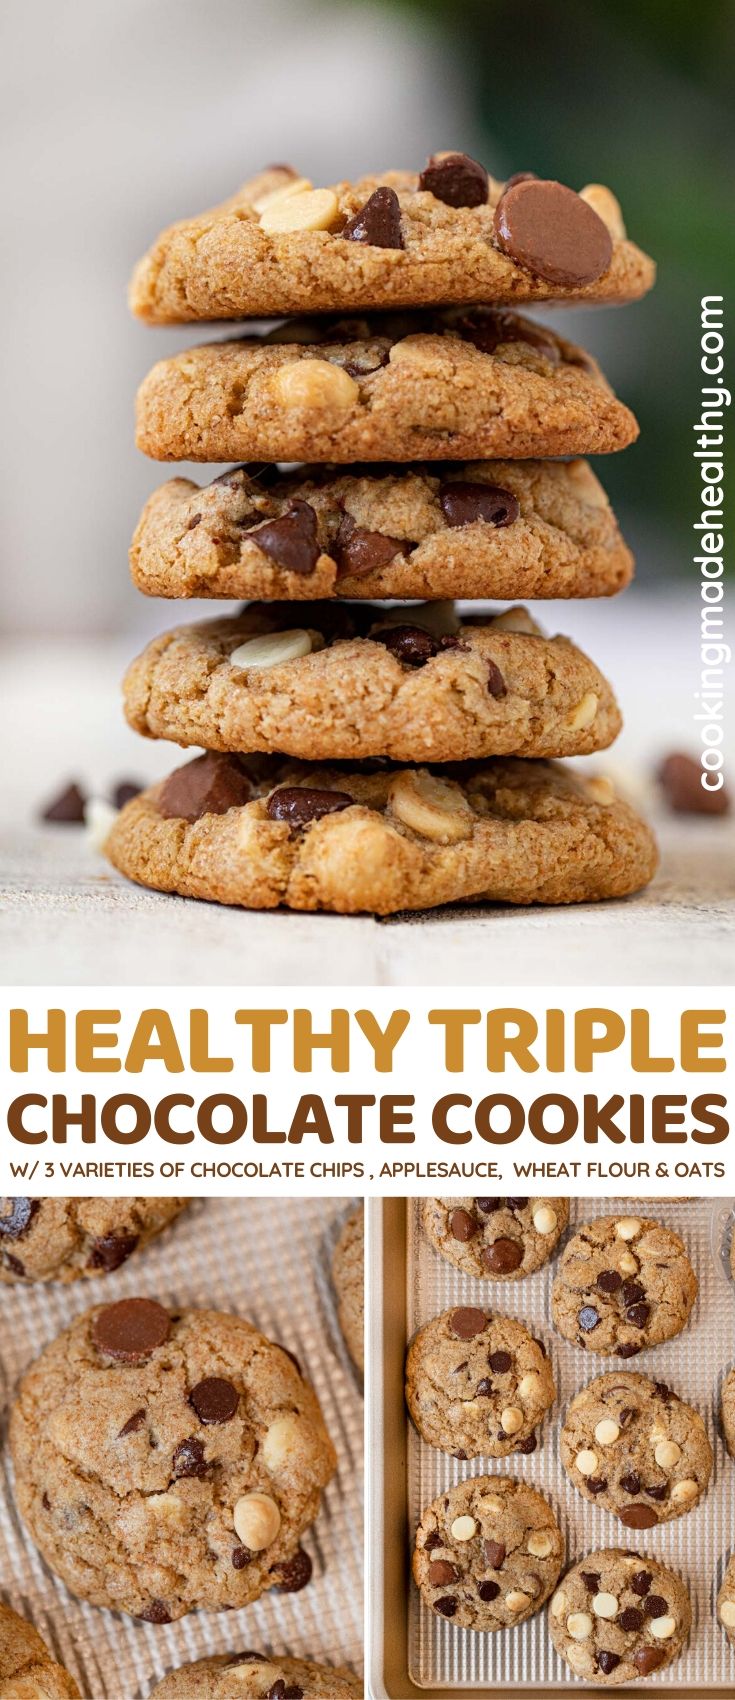 Healthy Triple Chocolate Cookies collage